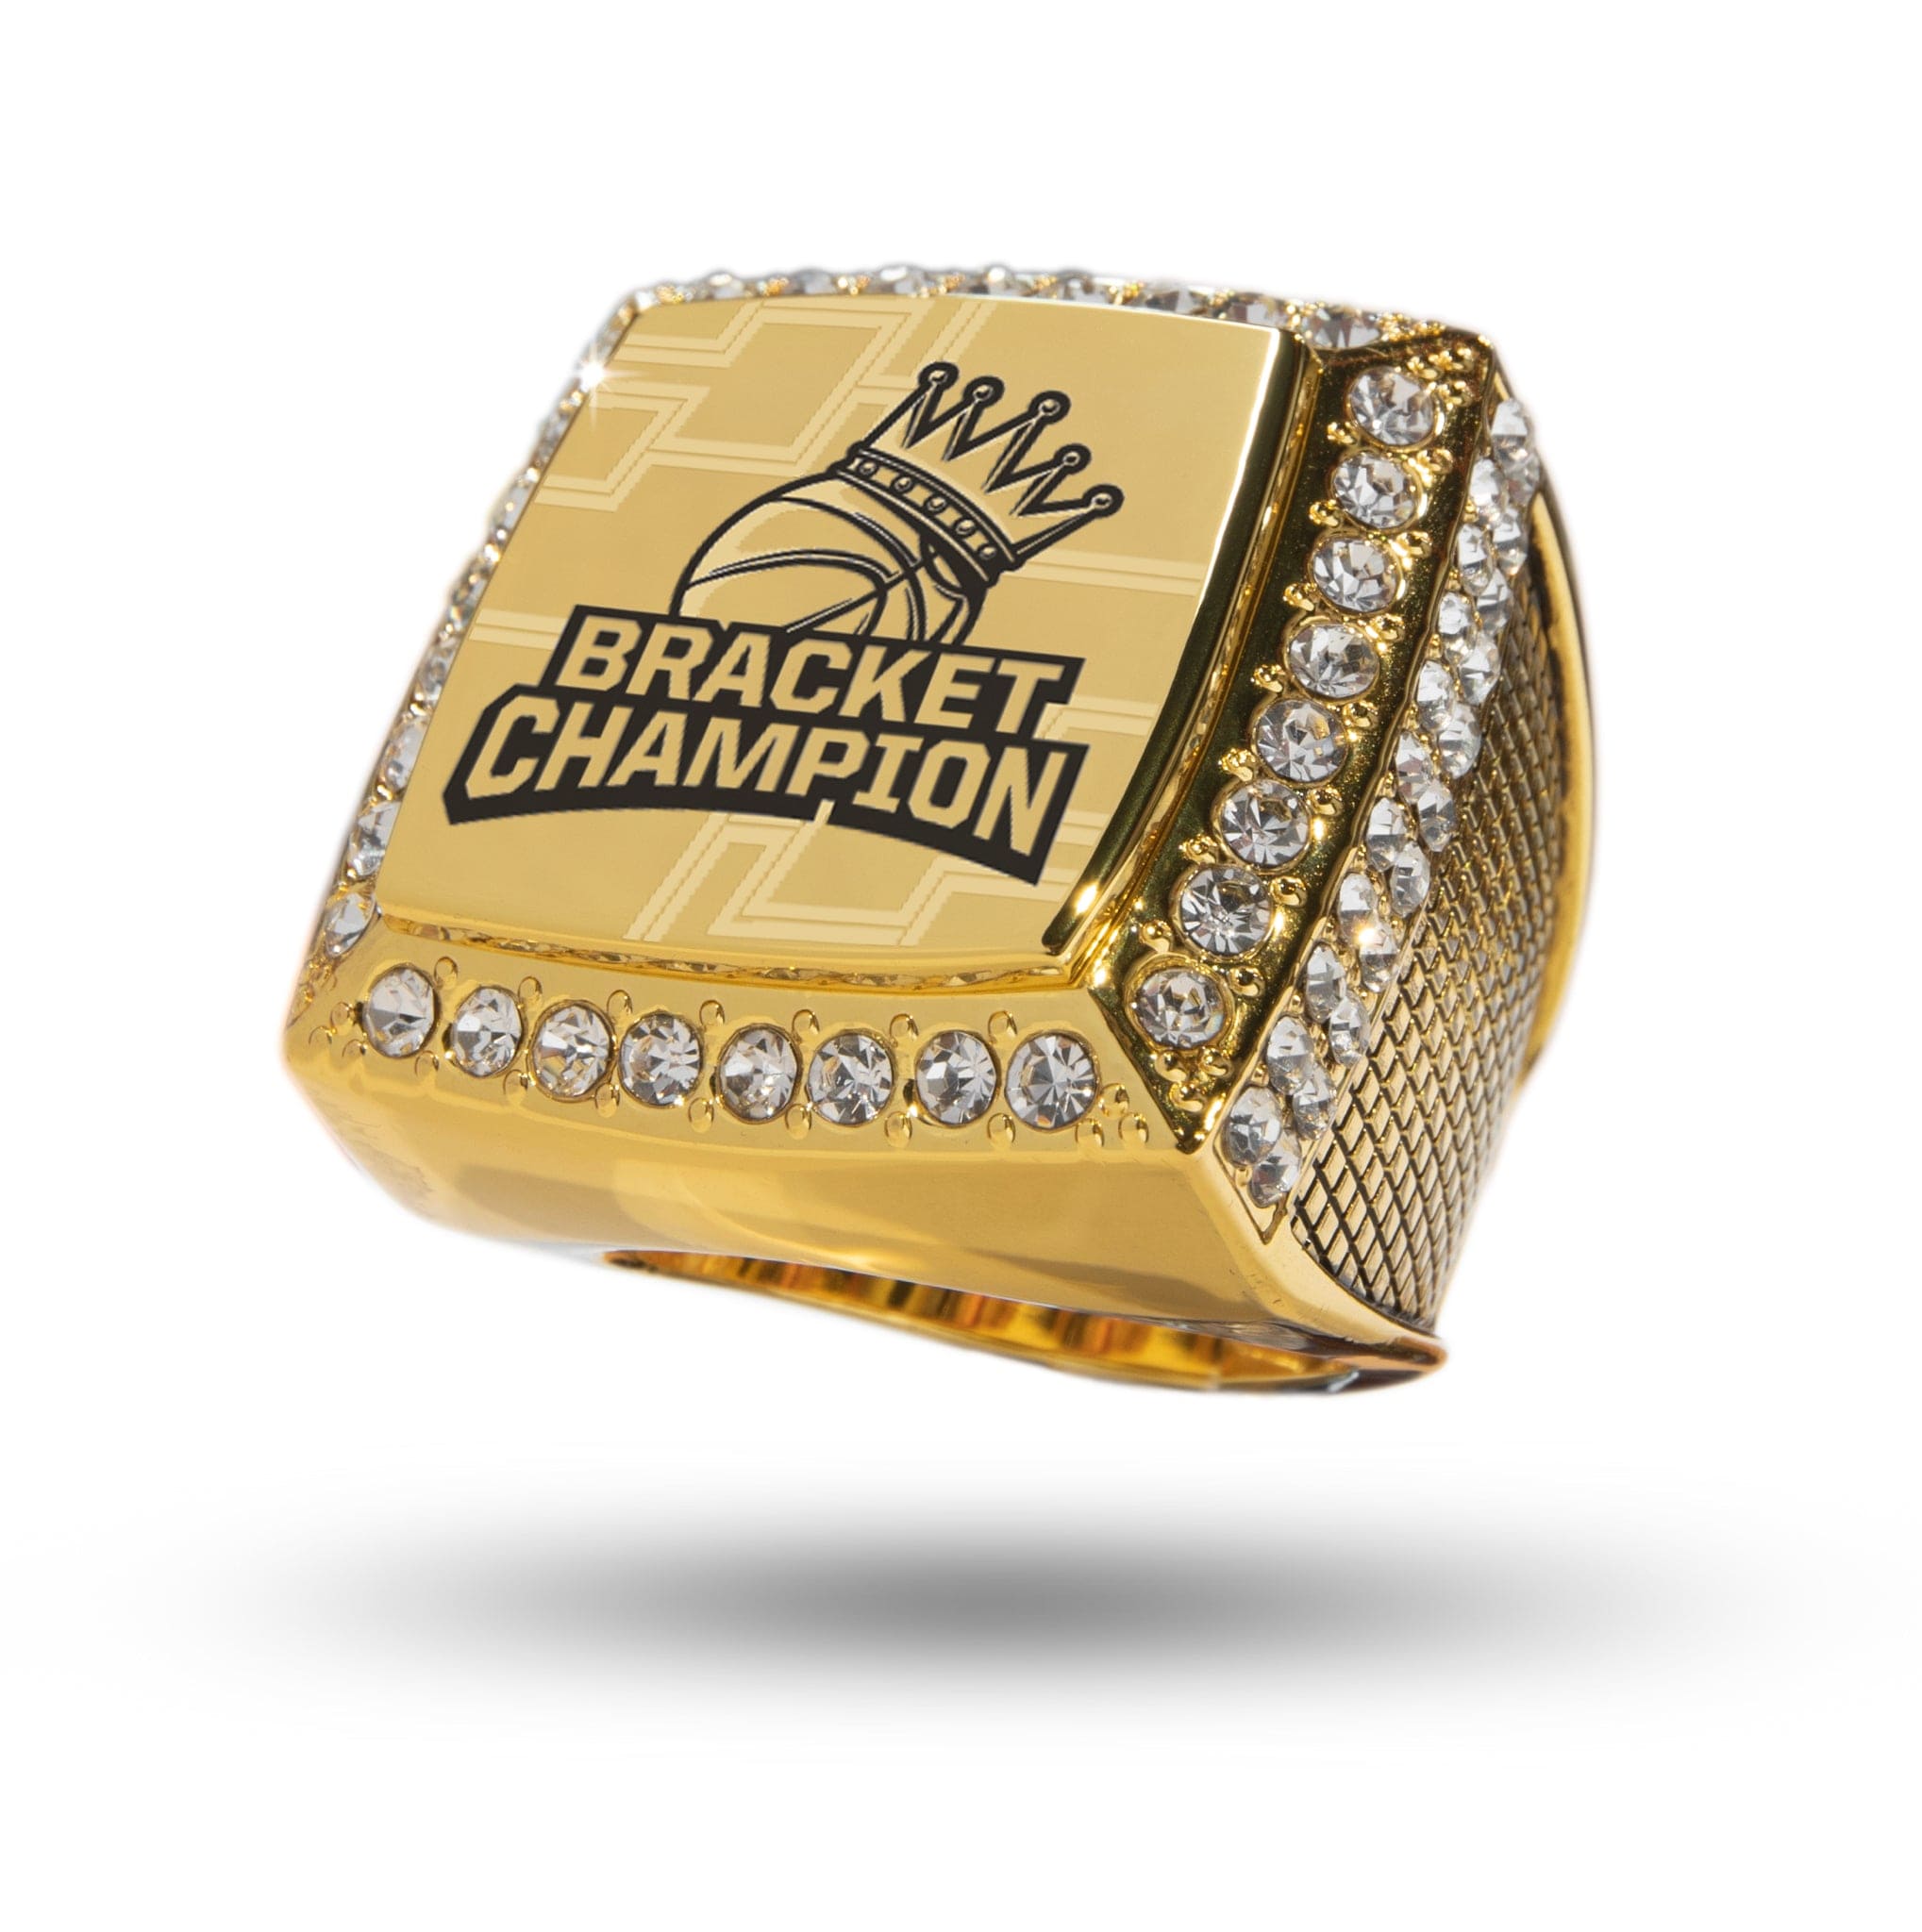 2017 GOLDEN STATE WARRIORS CHAMPIONSHIP RING Personalized league rings